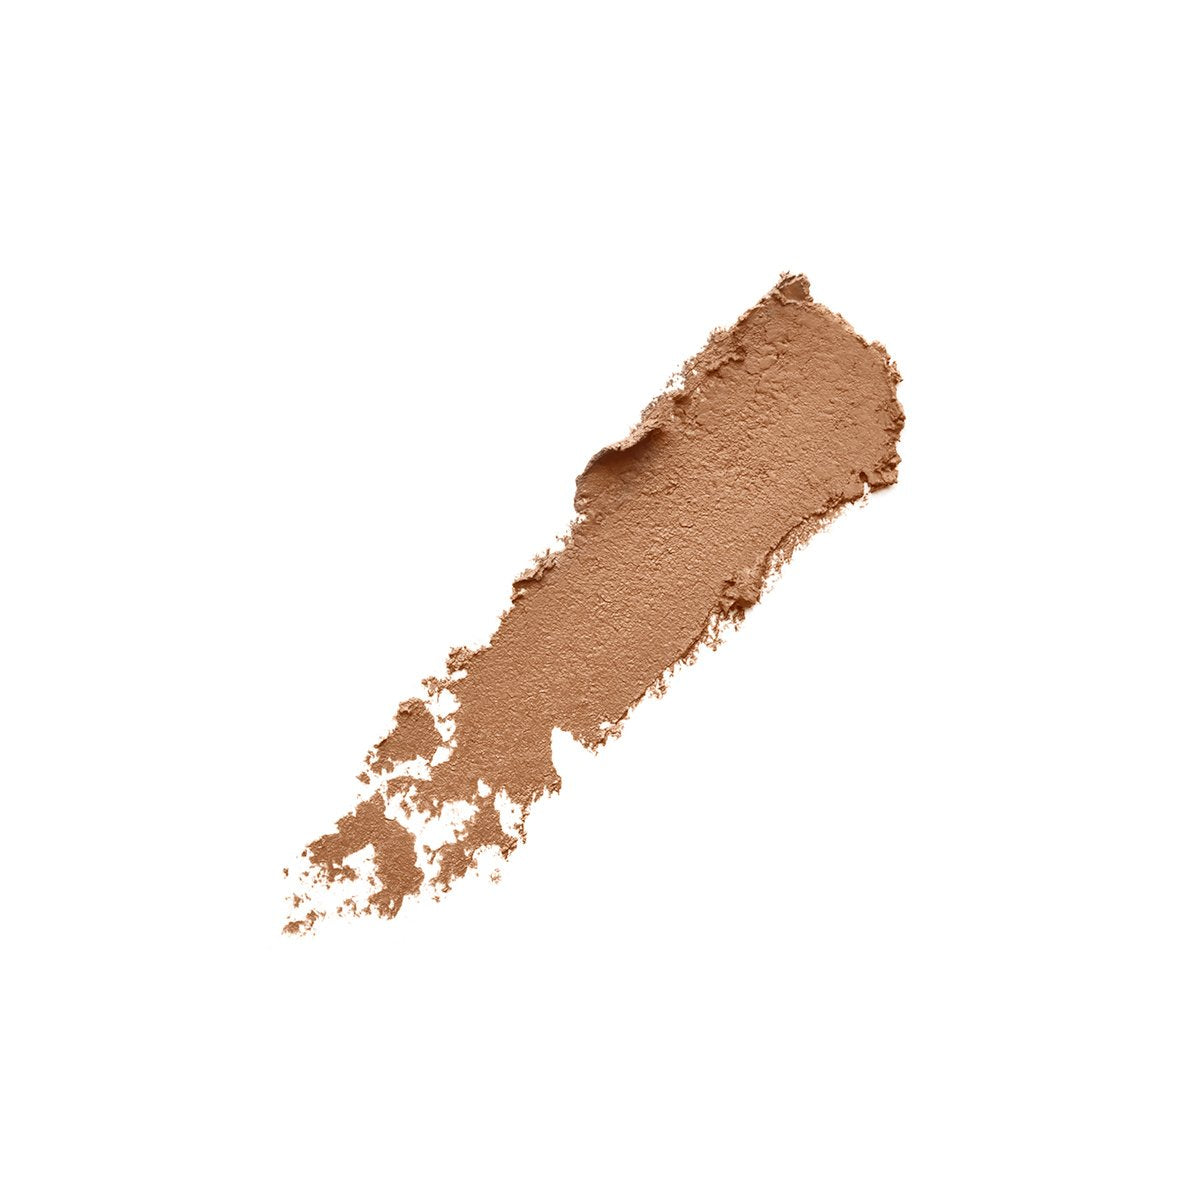 6 - TAN TO CARAMEL WITH PEACH TO WARM UNDERTONES - tan to caramel with peach to warm undertones cream concealer stick 